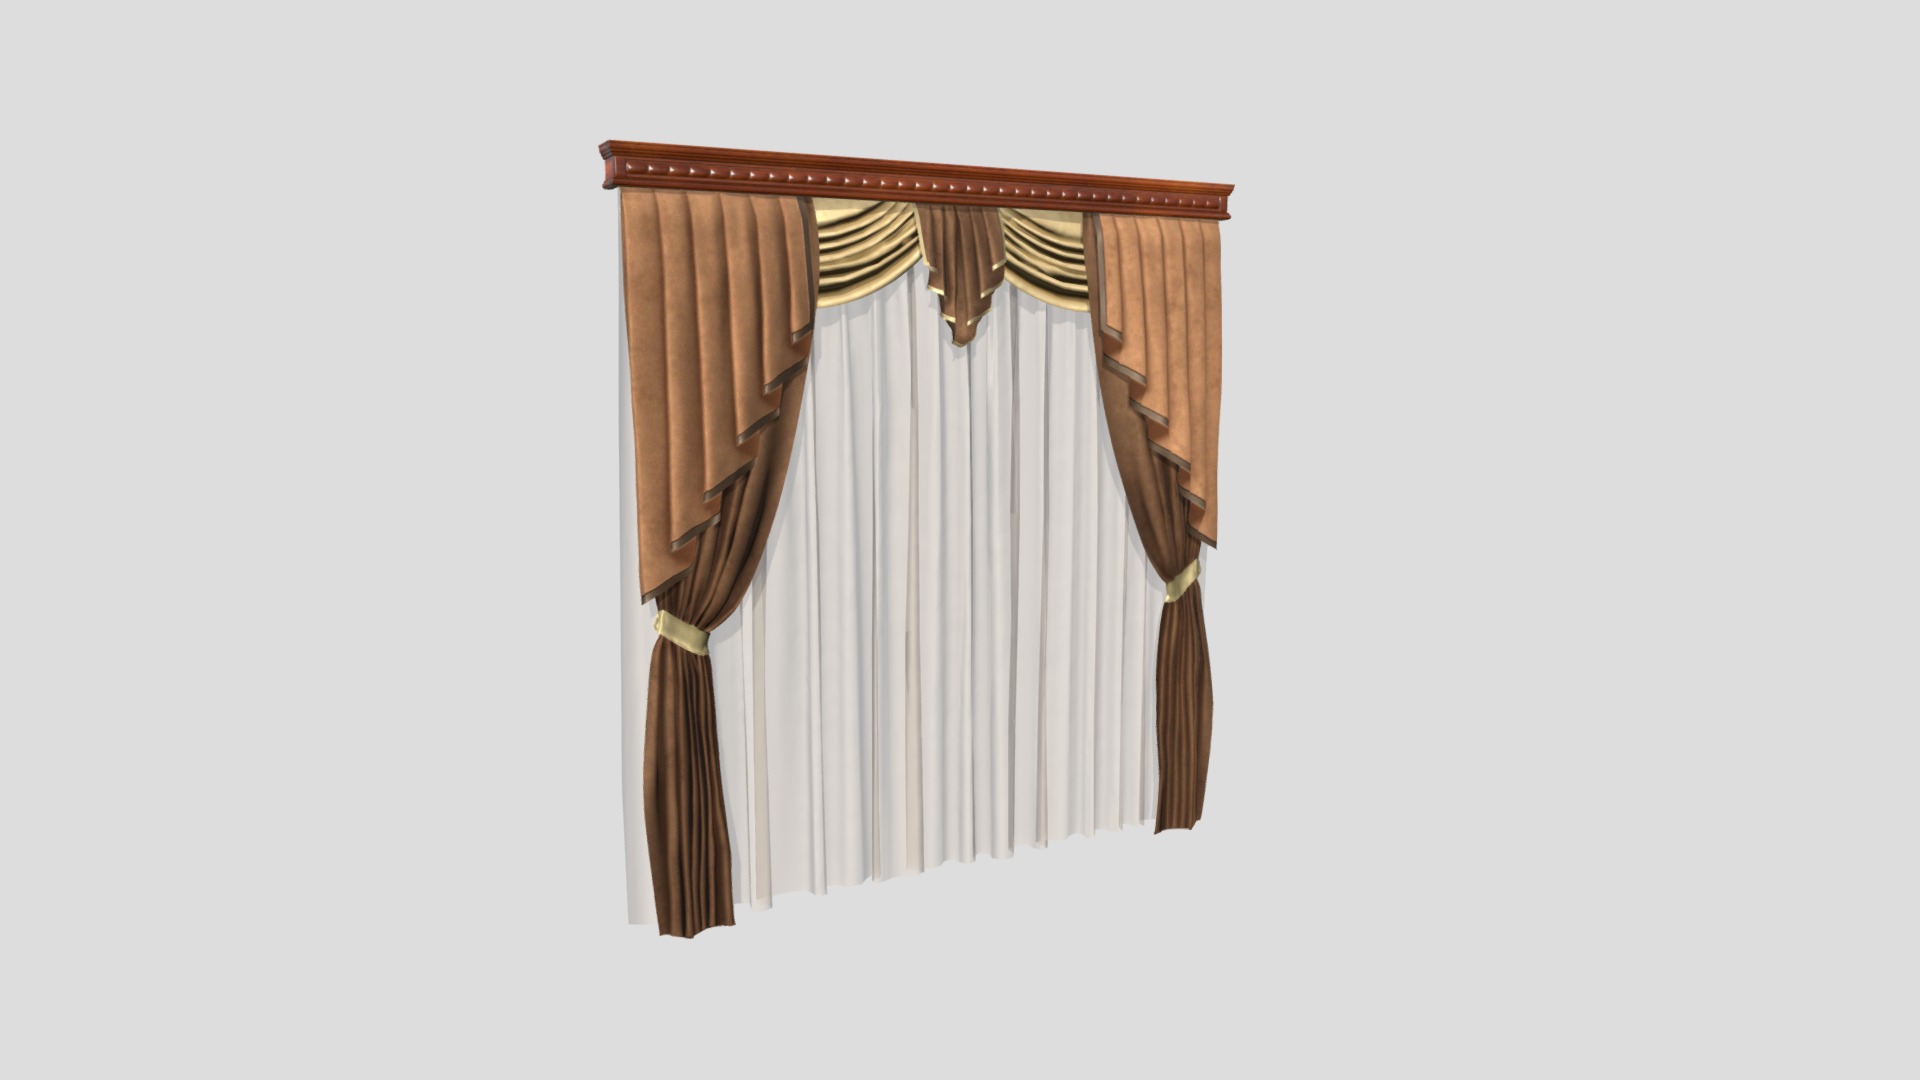 3D model №801 Curtain  3D low poly model for VR-projects - This is a 3D model of the №801 Curtain  3D low poly model for VR-projects. The 3D model is about a wooden frame with a bow.